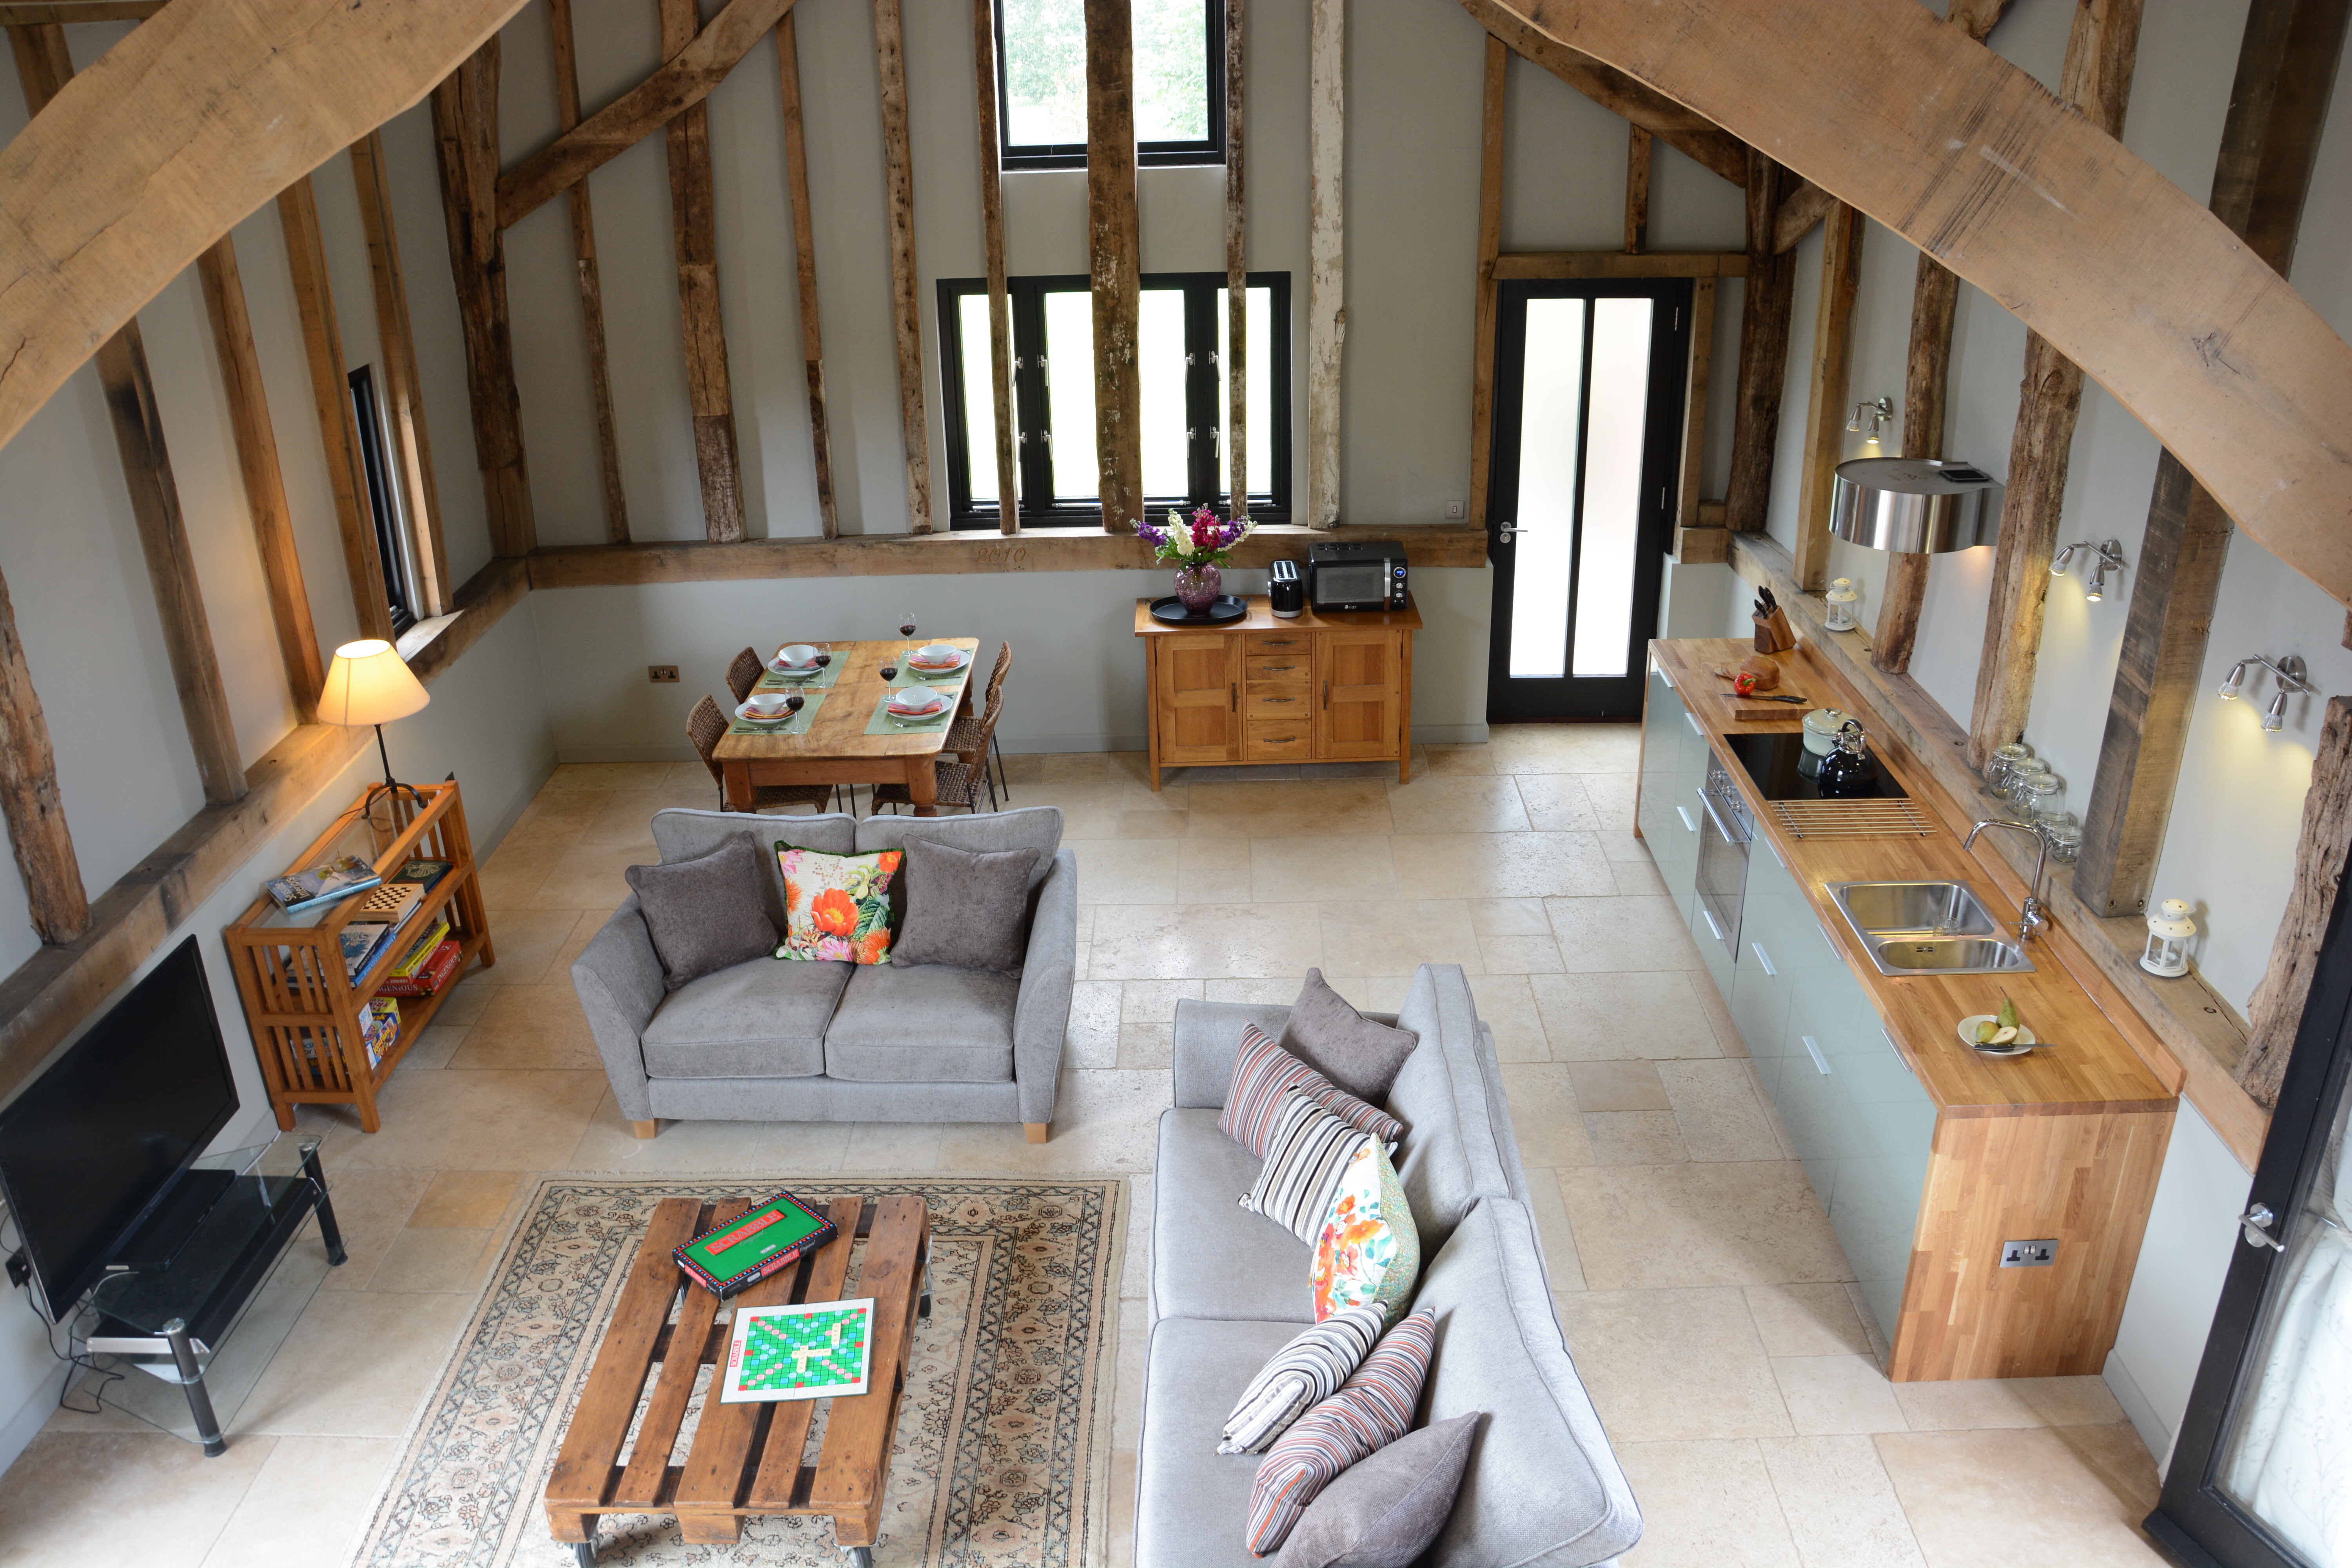 Holiday Cottages in Suffolk: Manor House Barn, Peasenhall | sykescottages.co.uk 